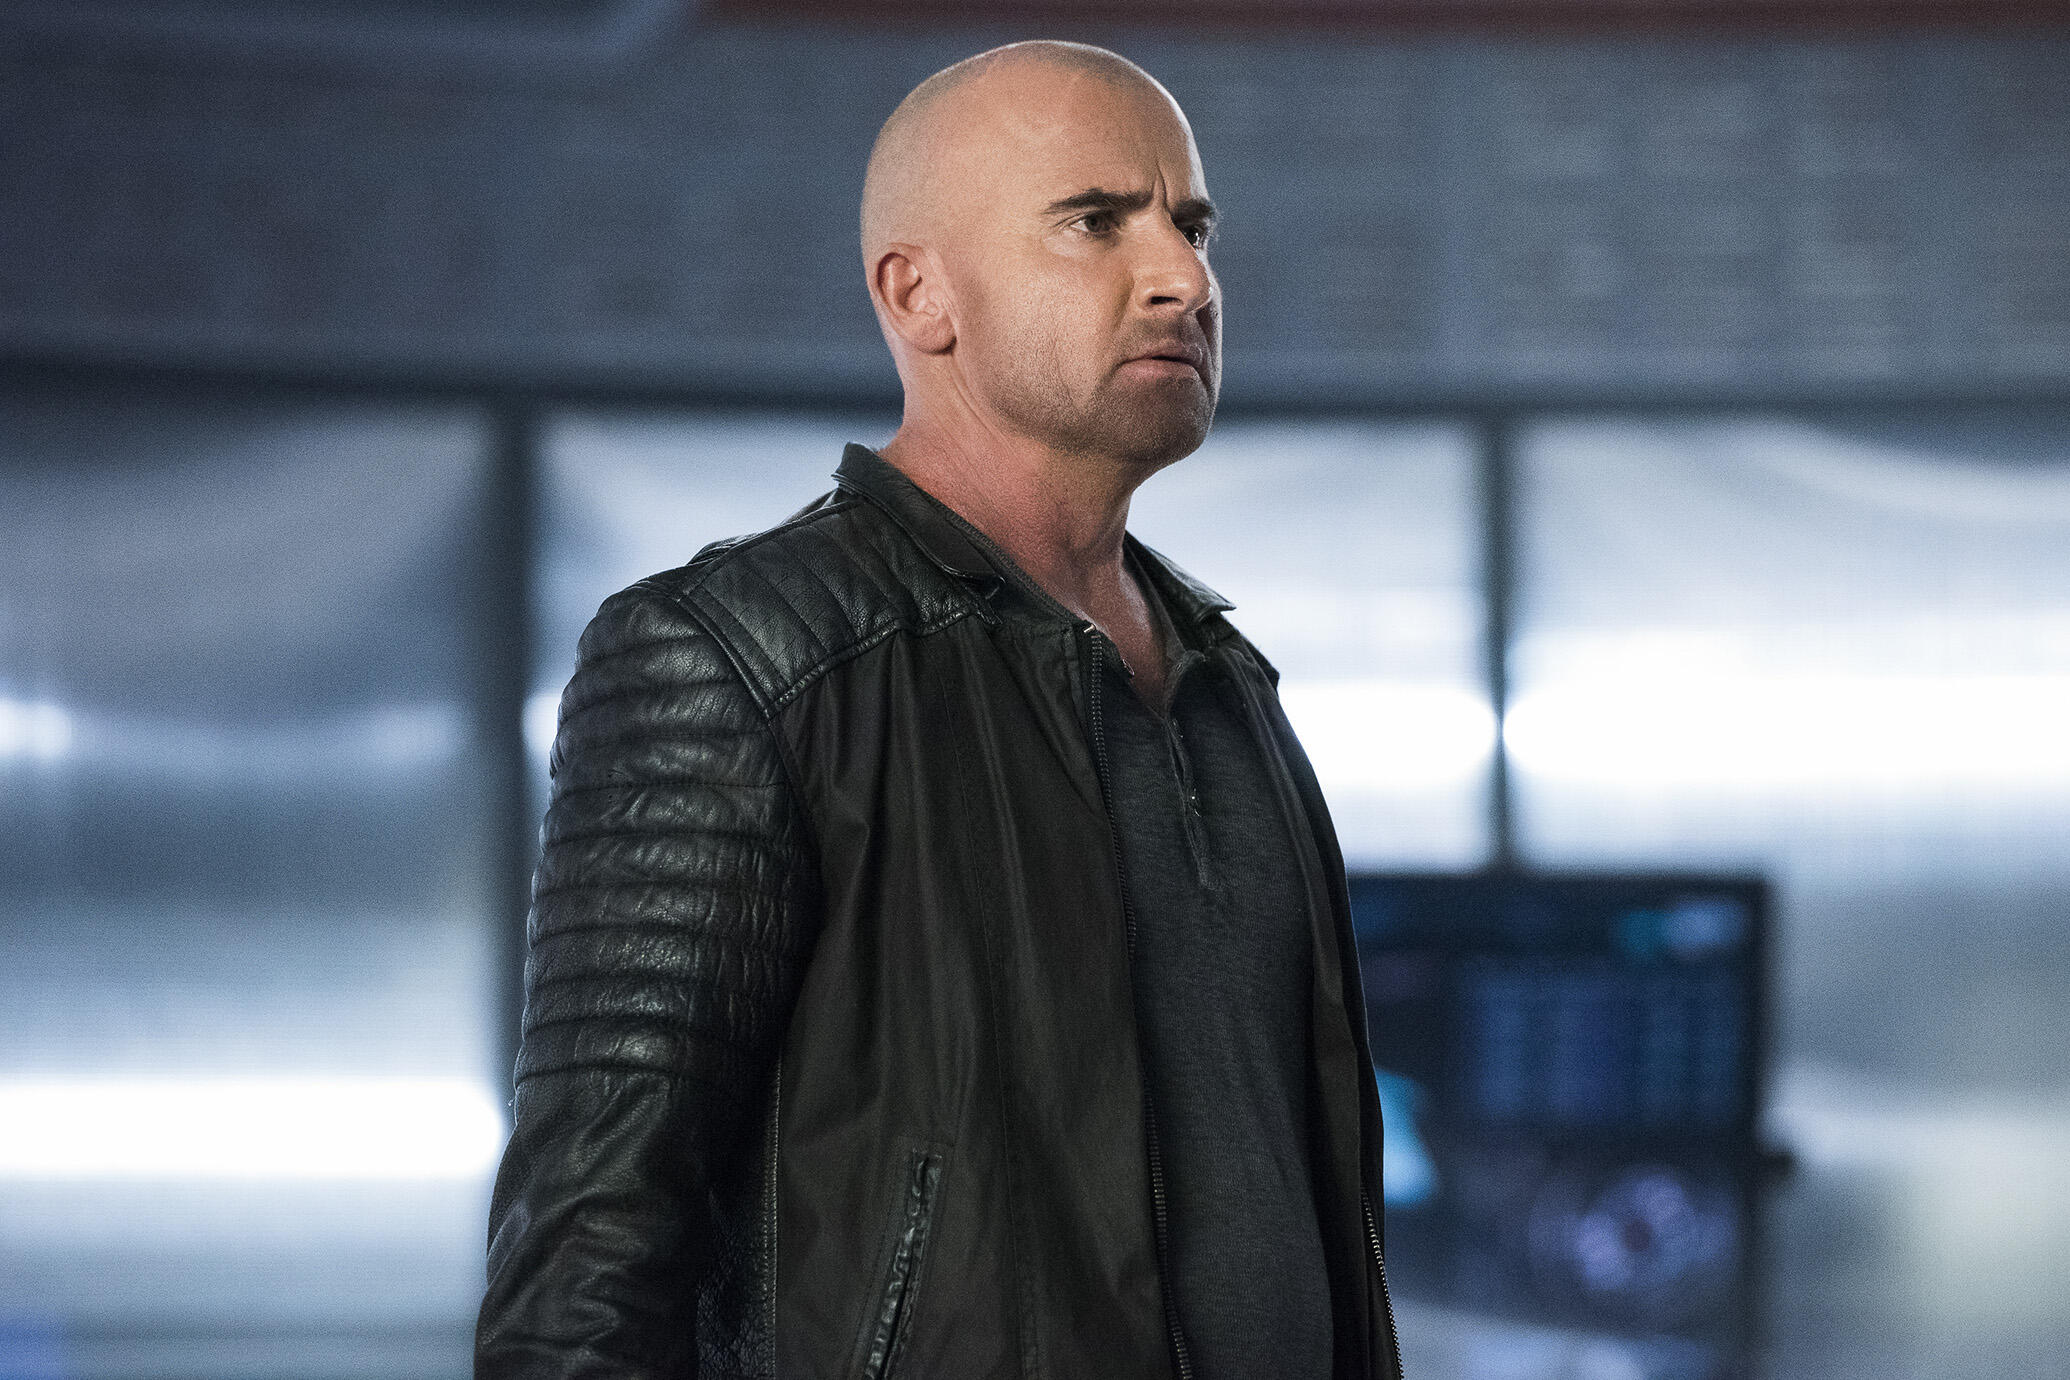 Dominic Purcell, DC's Legends of Tomorrow